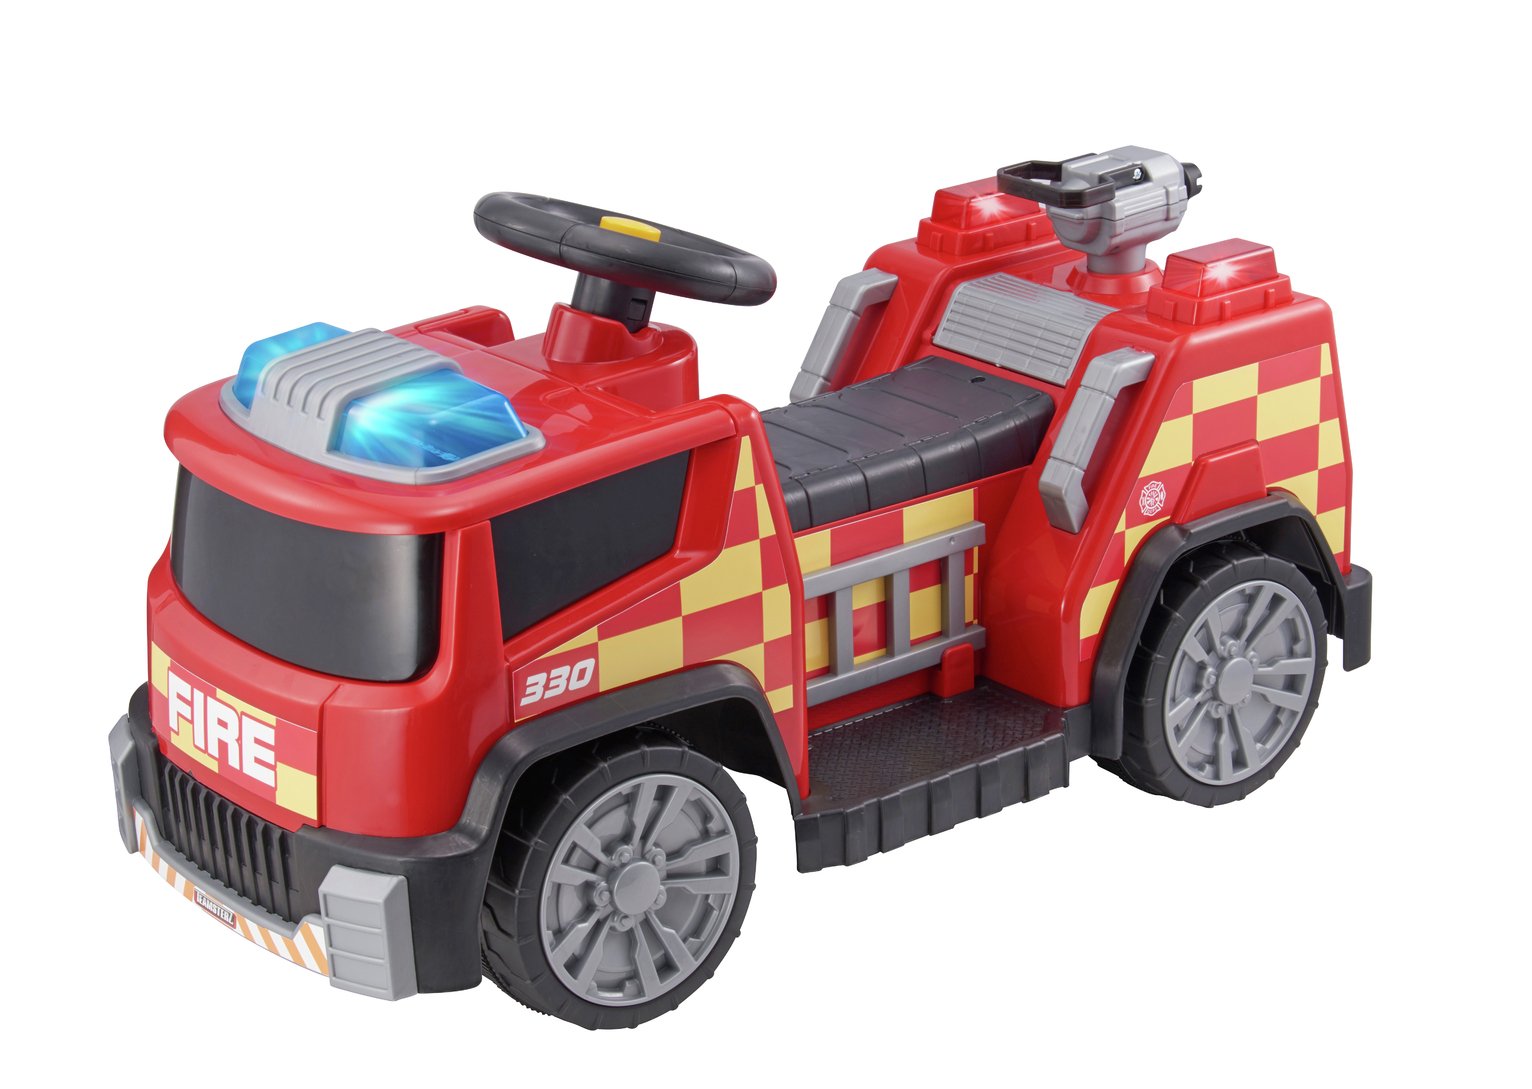 chad valley emergency fire engine